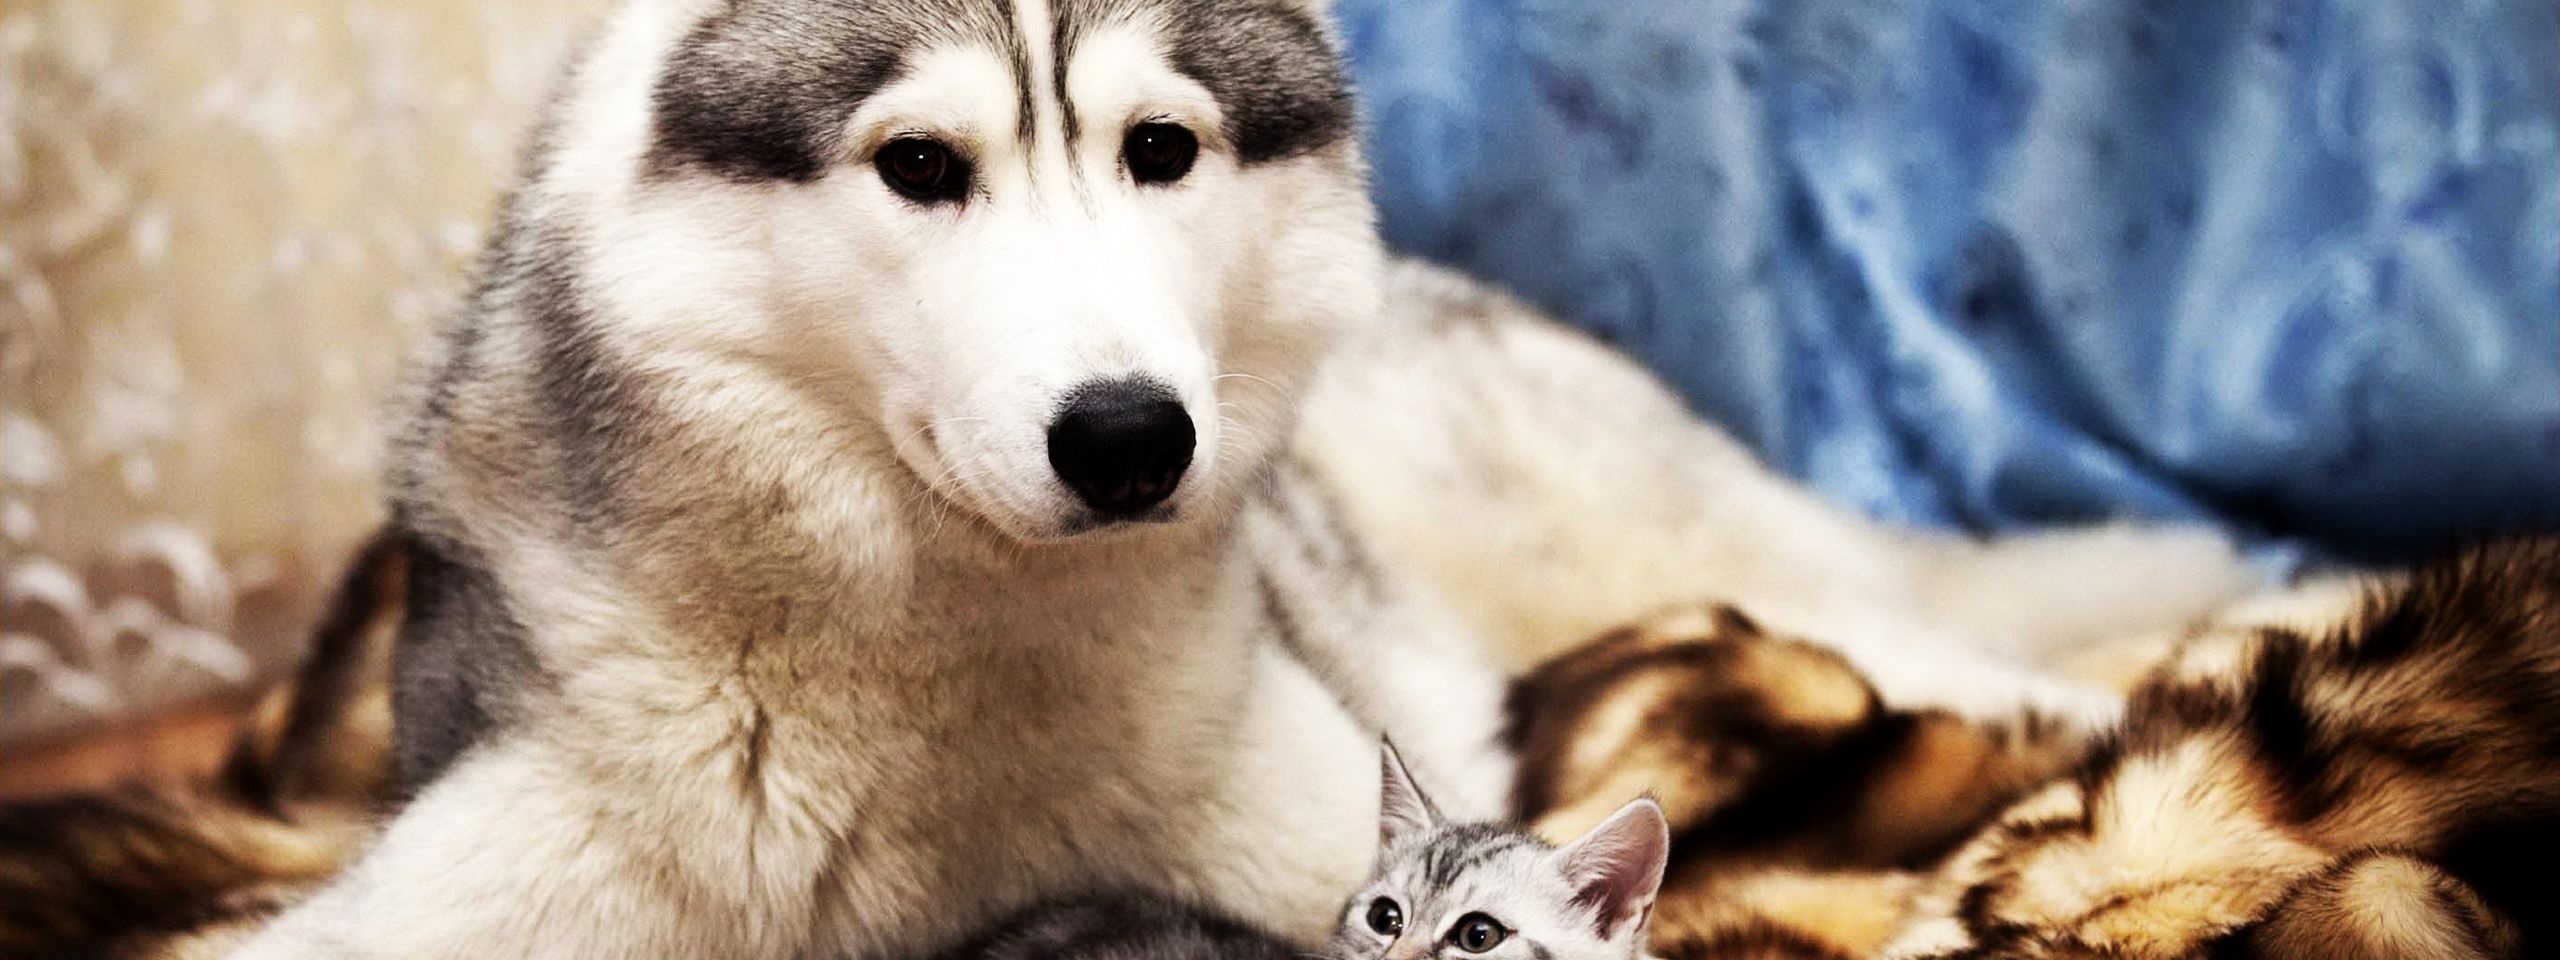 Dog And Cat Friends